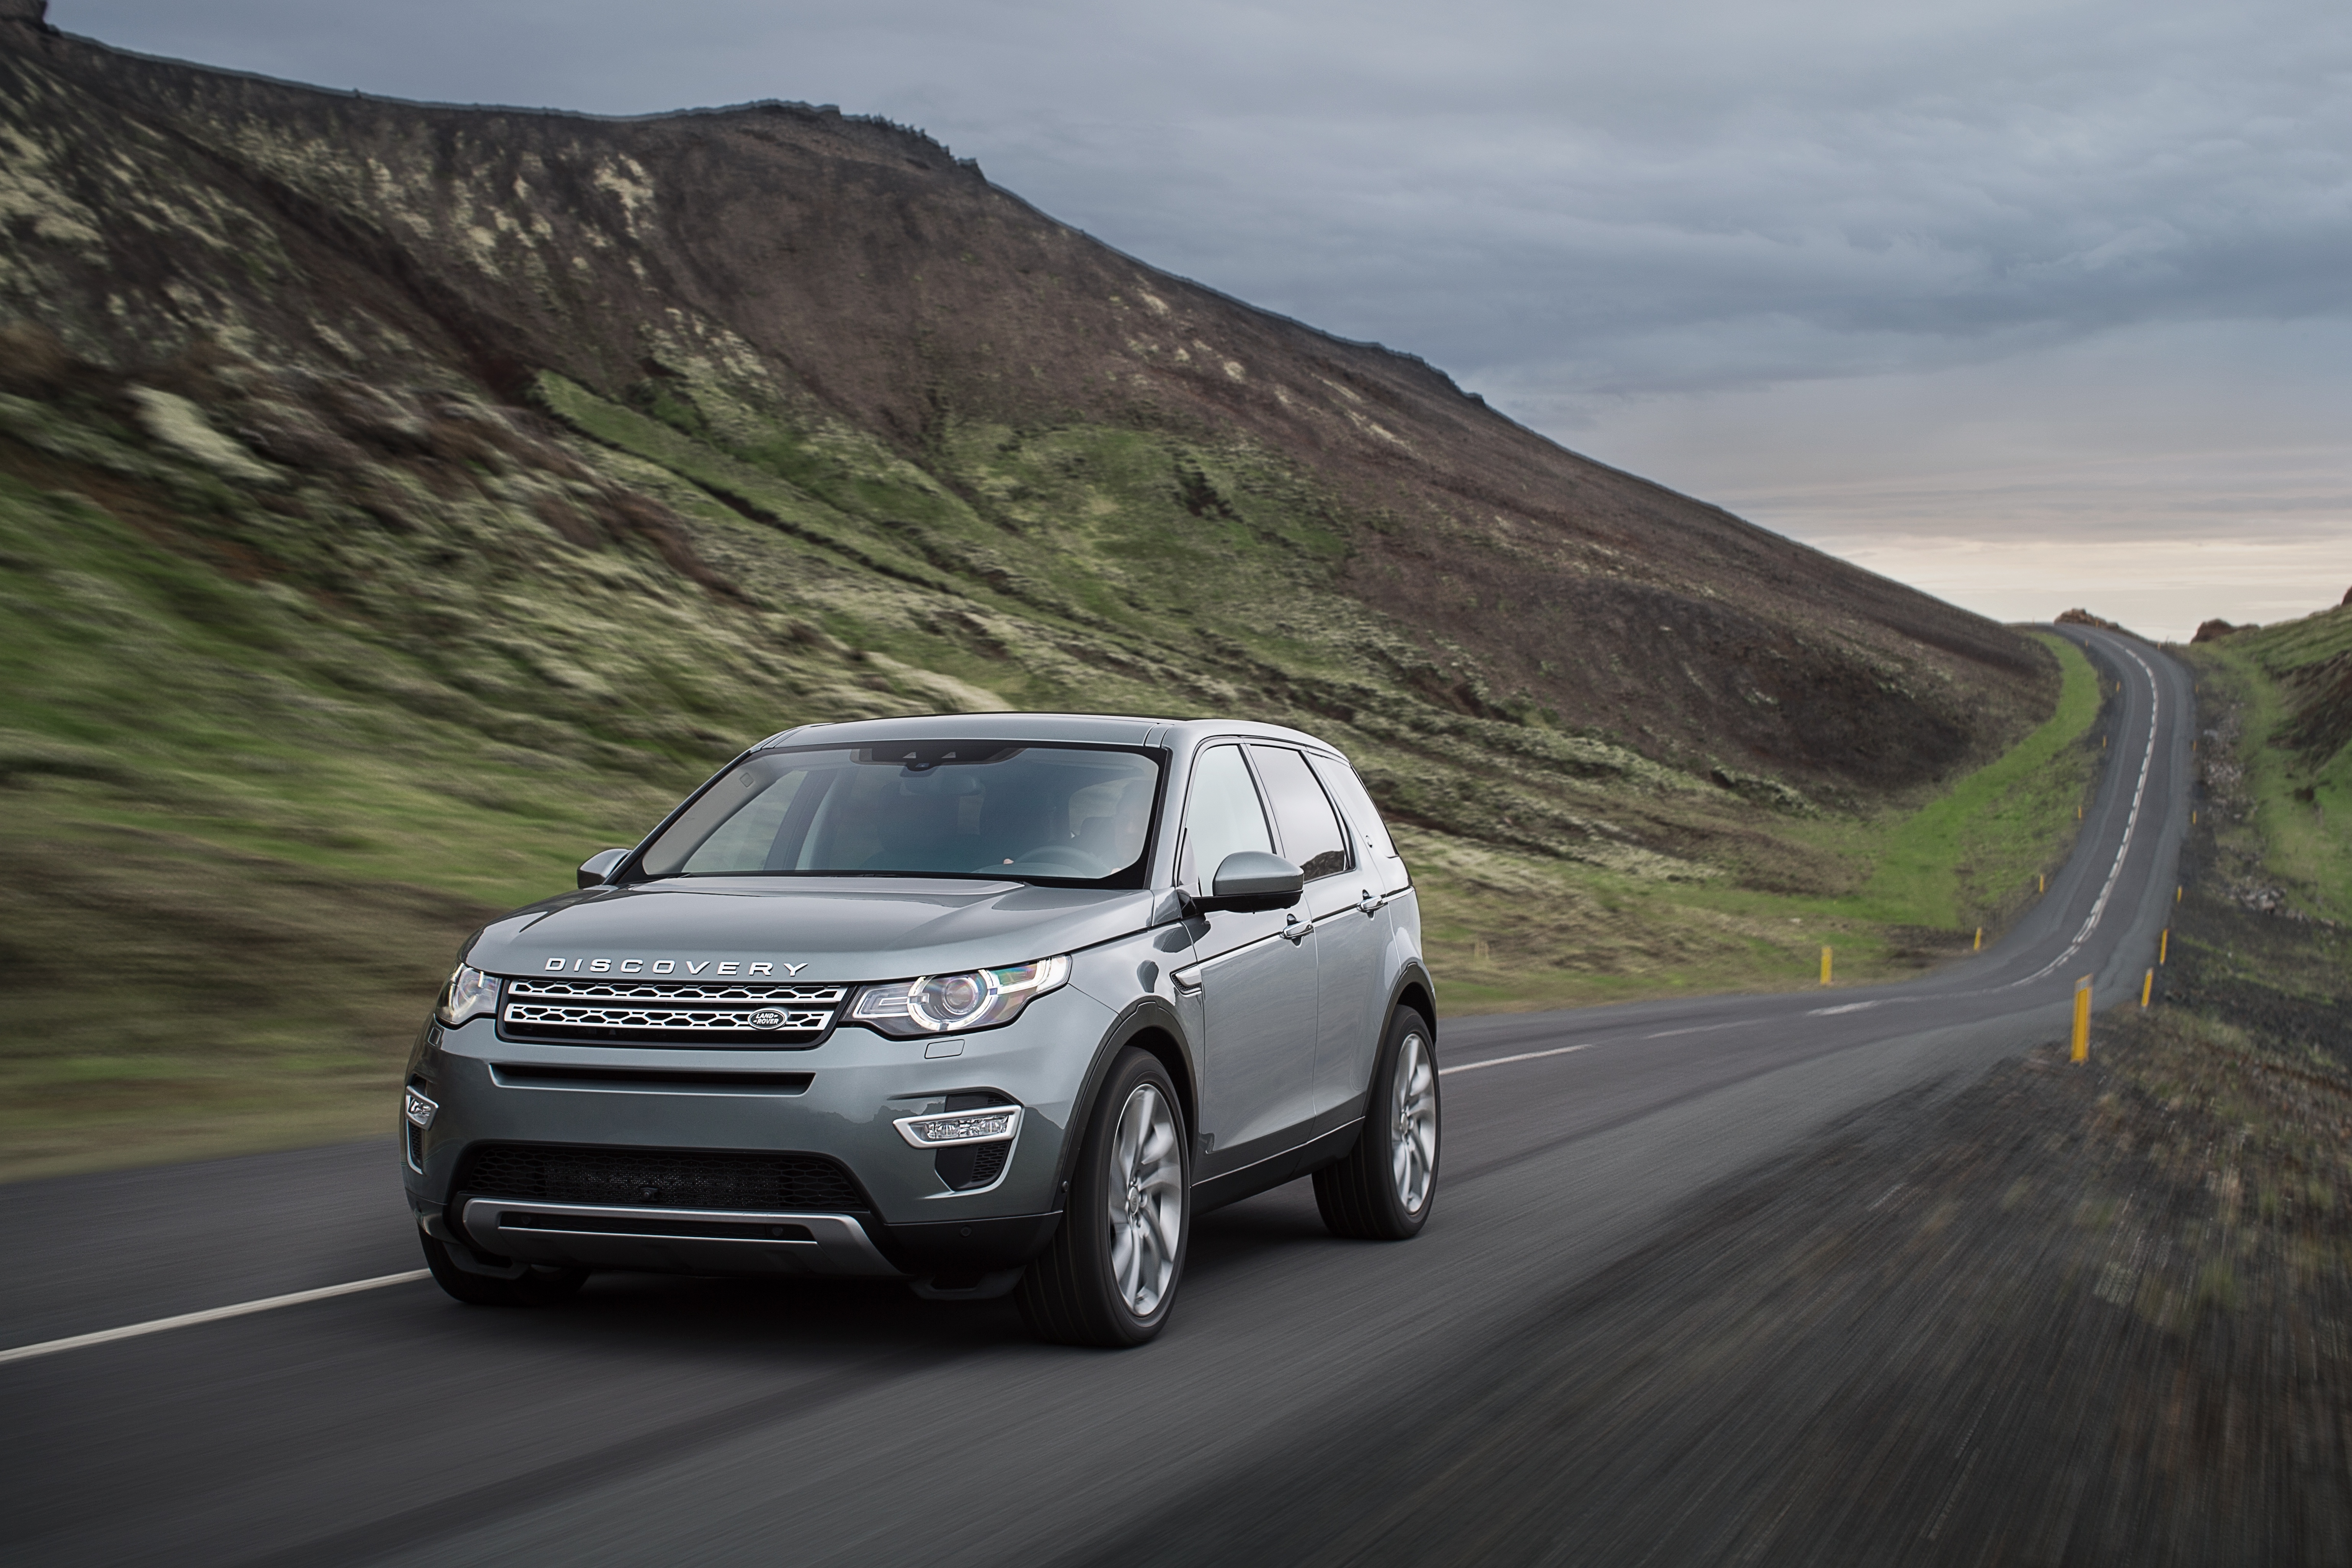 Land rover sport 2015. Land Rover Discovery Sport 2015. Ленд Ровер Дискавери спорт 2015. Ленд Ровер Дискавери 2015. Дискавери спорт 2022.